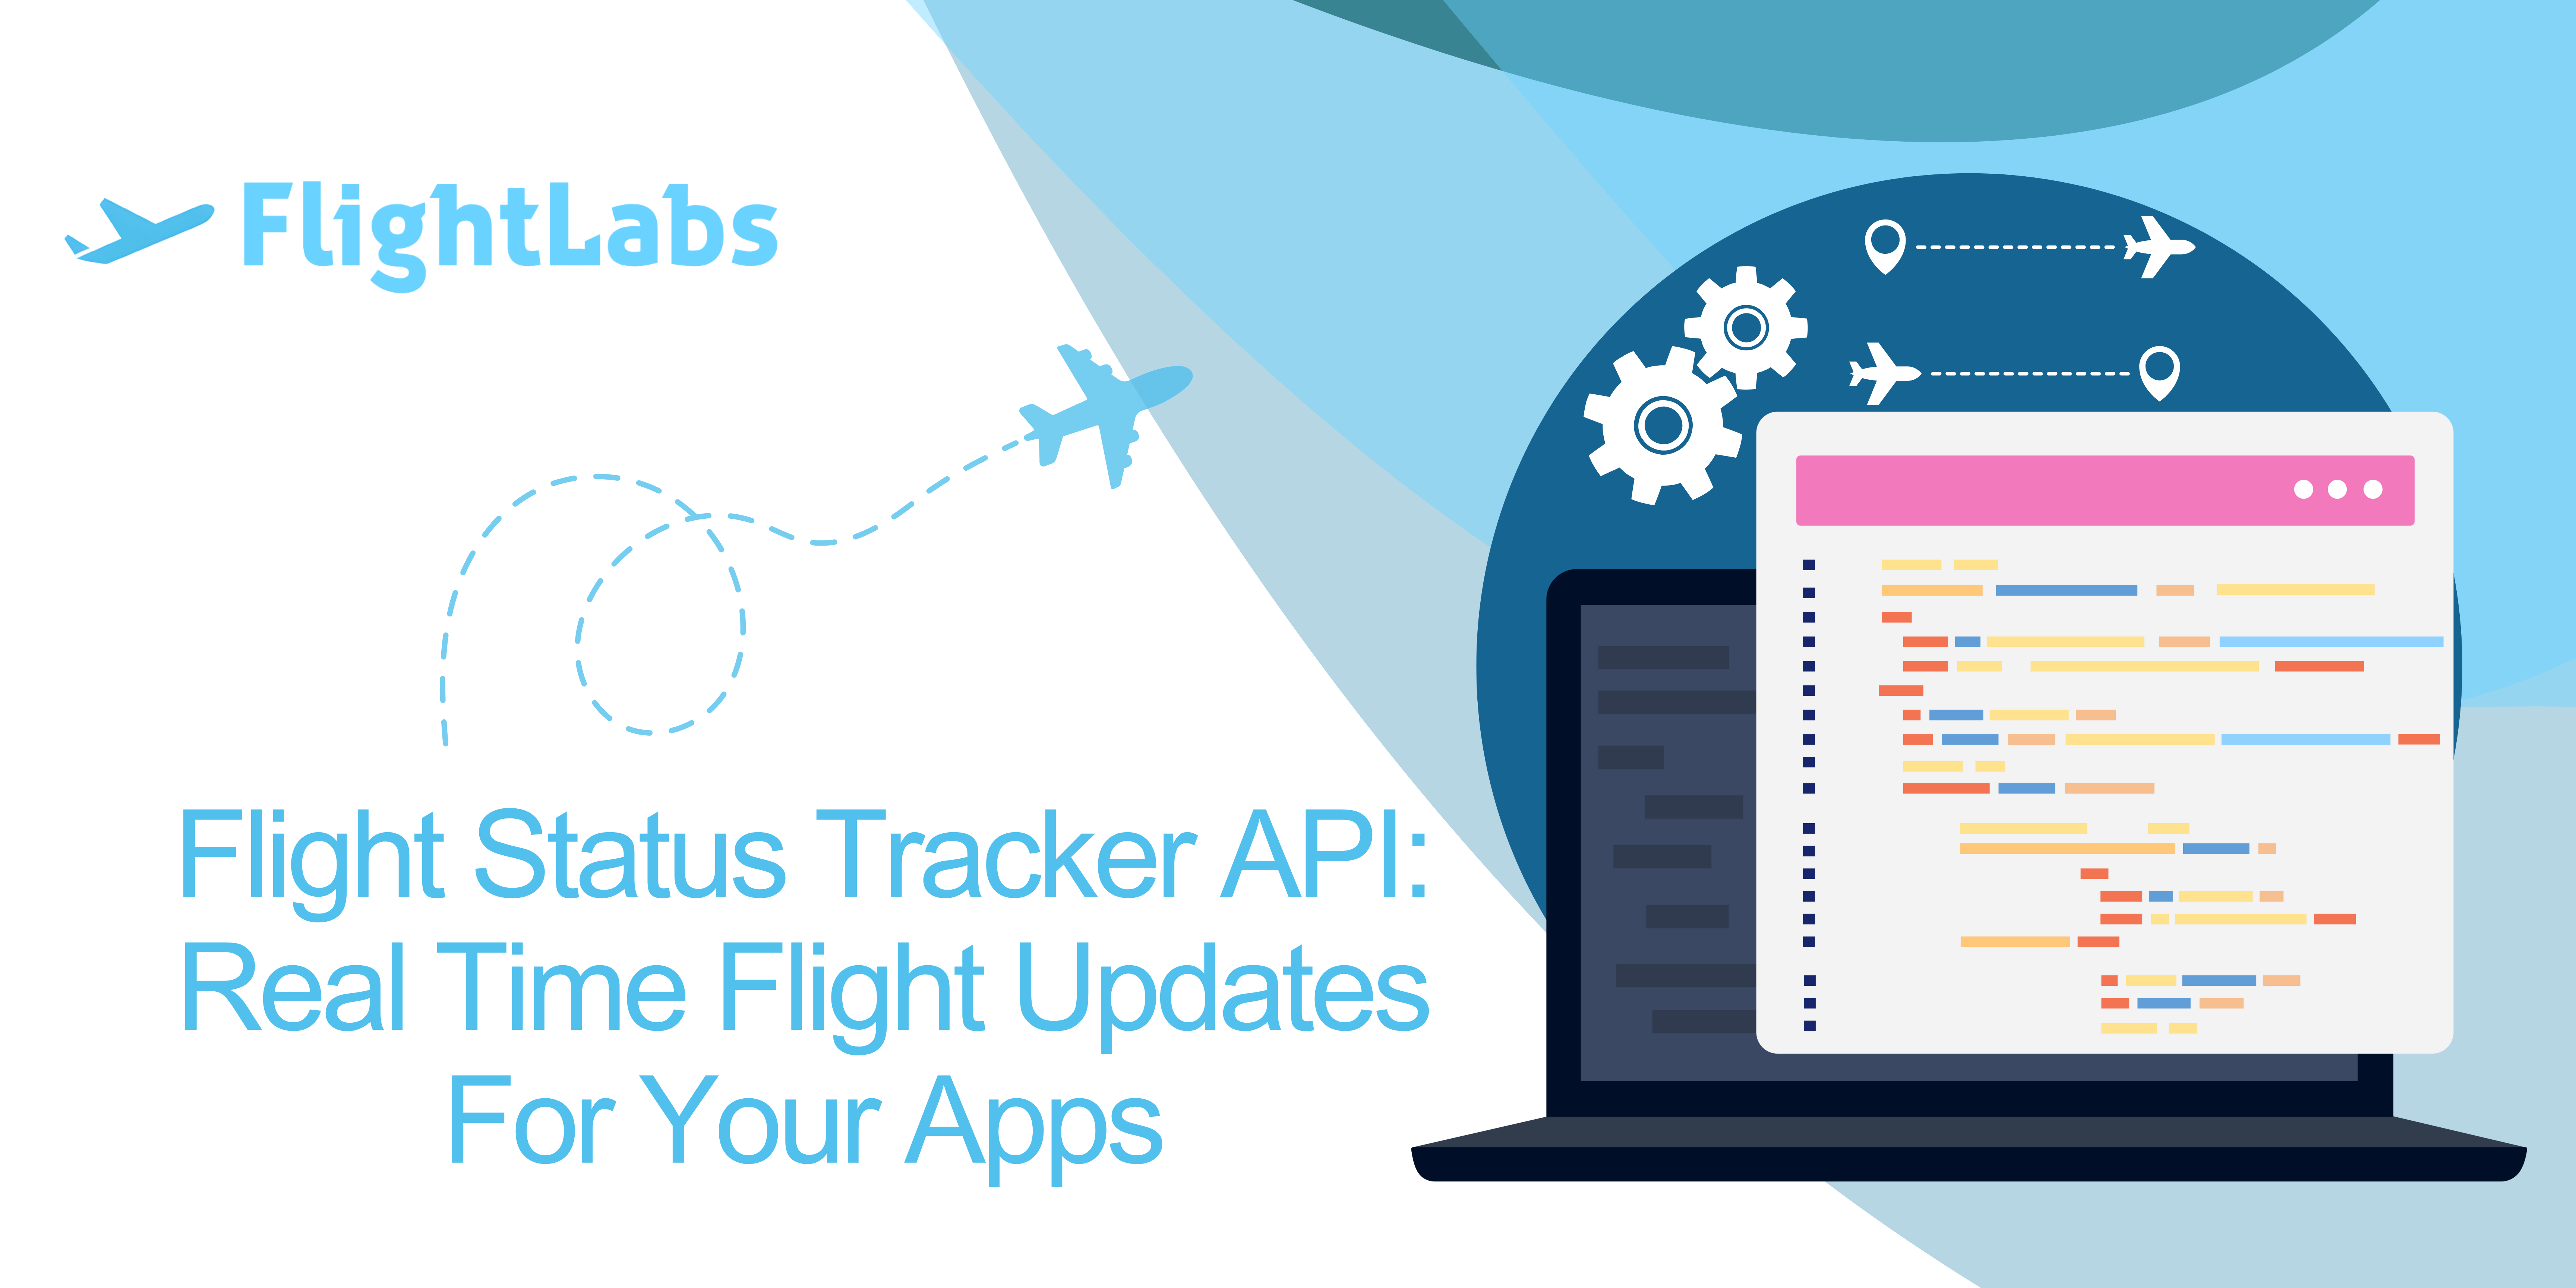 Flight Status Tracker API: Real Time Flight Updates For Your Apps